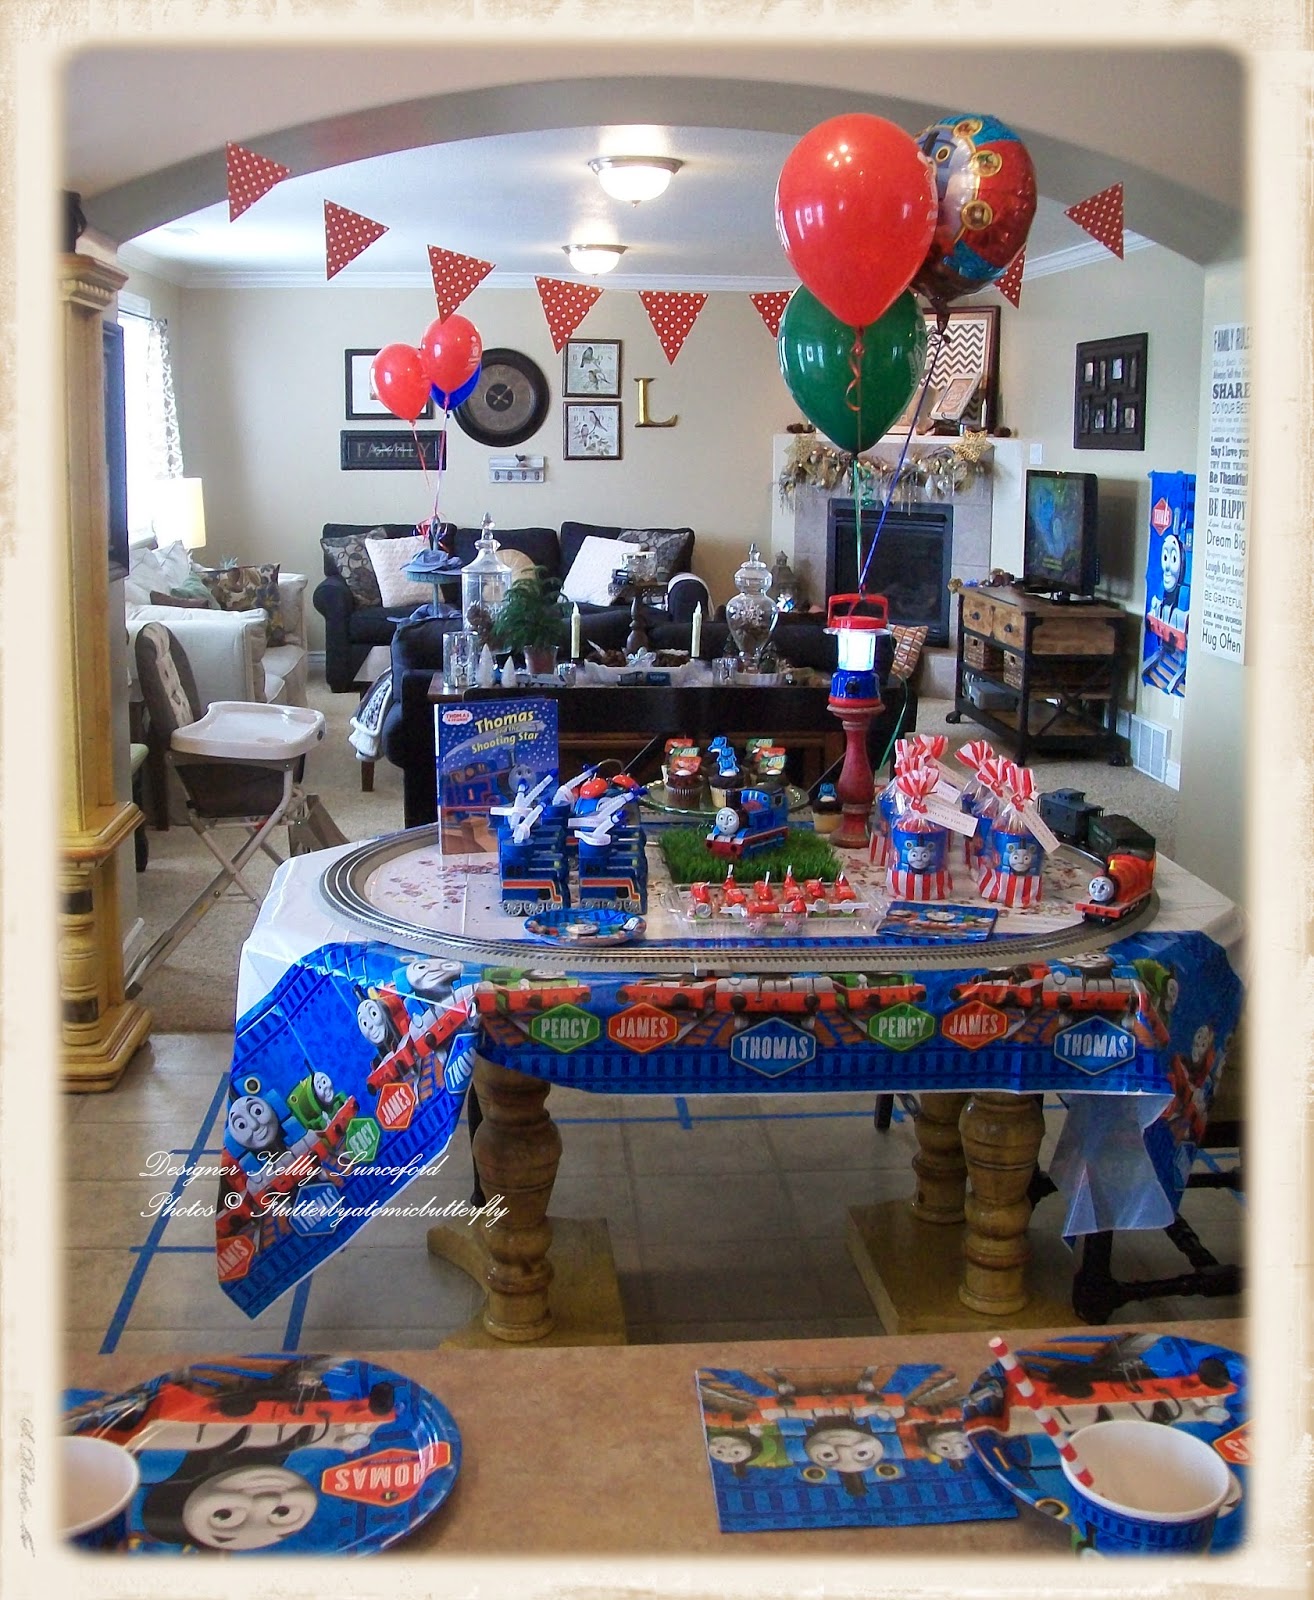 flutter-by-atomicbutterfly-thomas-the-tank-engine-5th-birthday-party